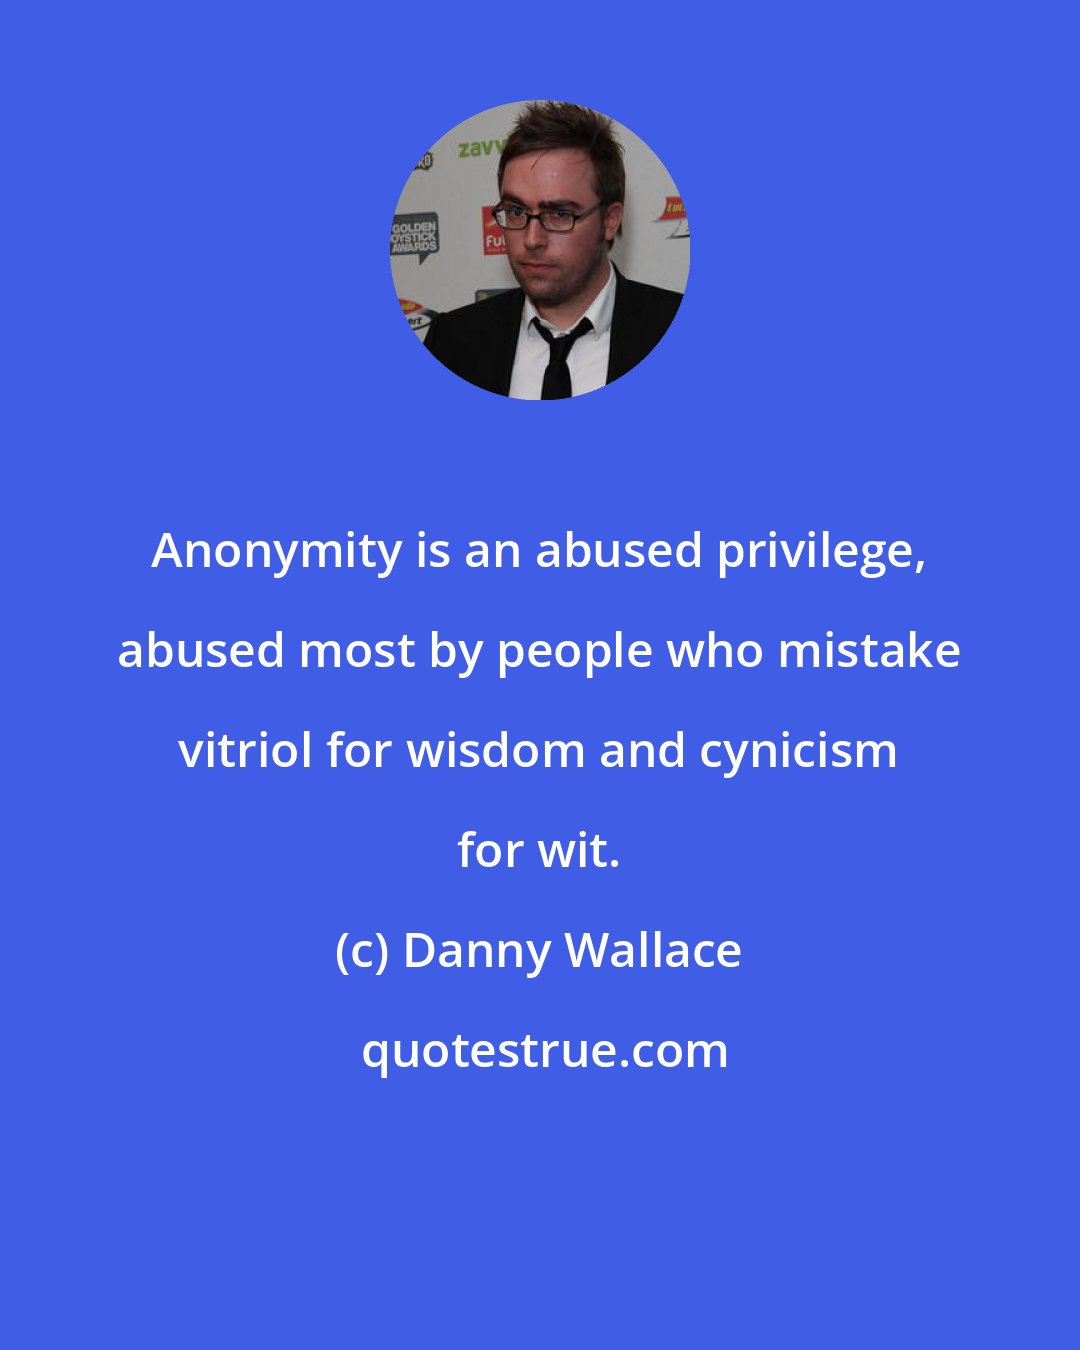 Danny Wallace: Anonymity is an abused privilege, abused most by people who mistake vitriol for wisdom and cynicism for wit.